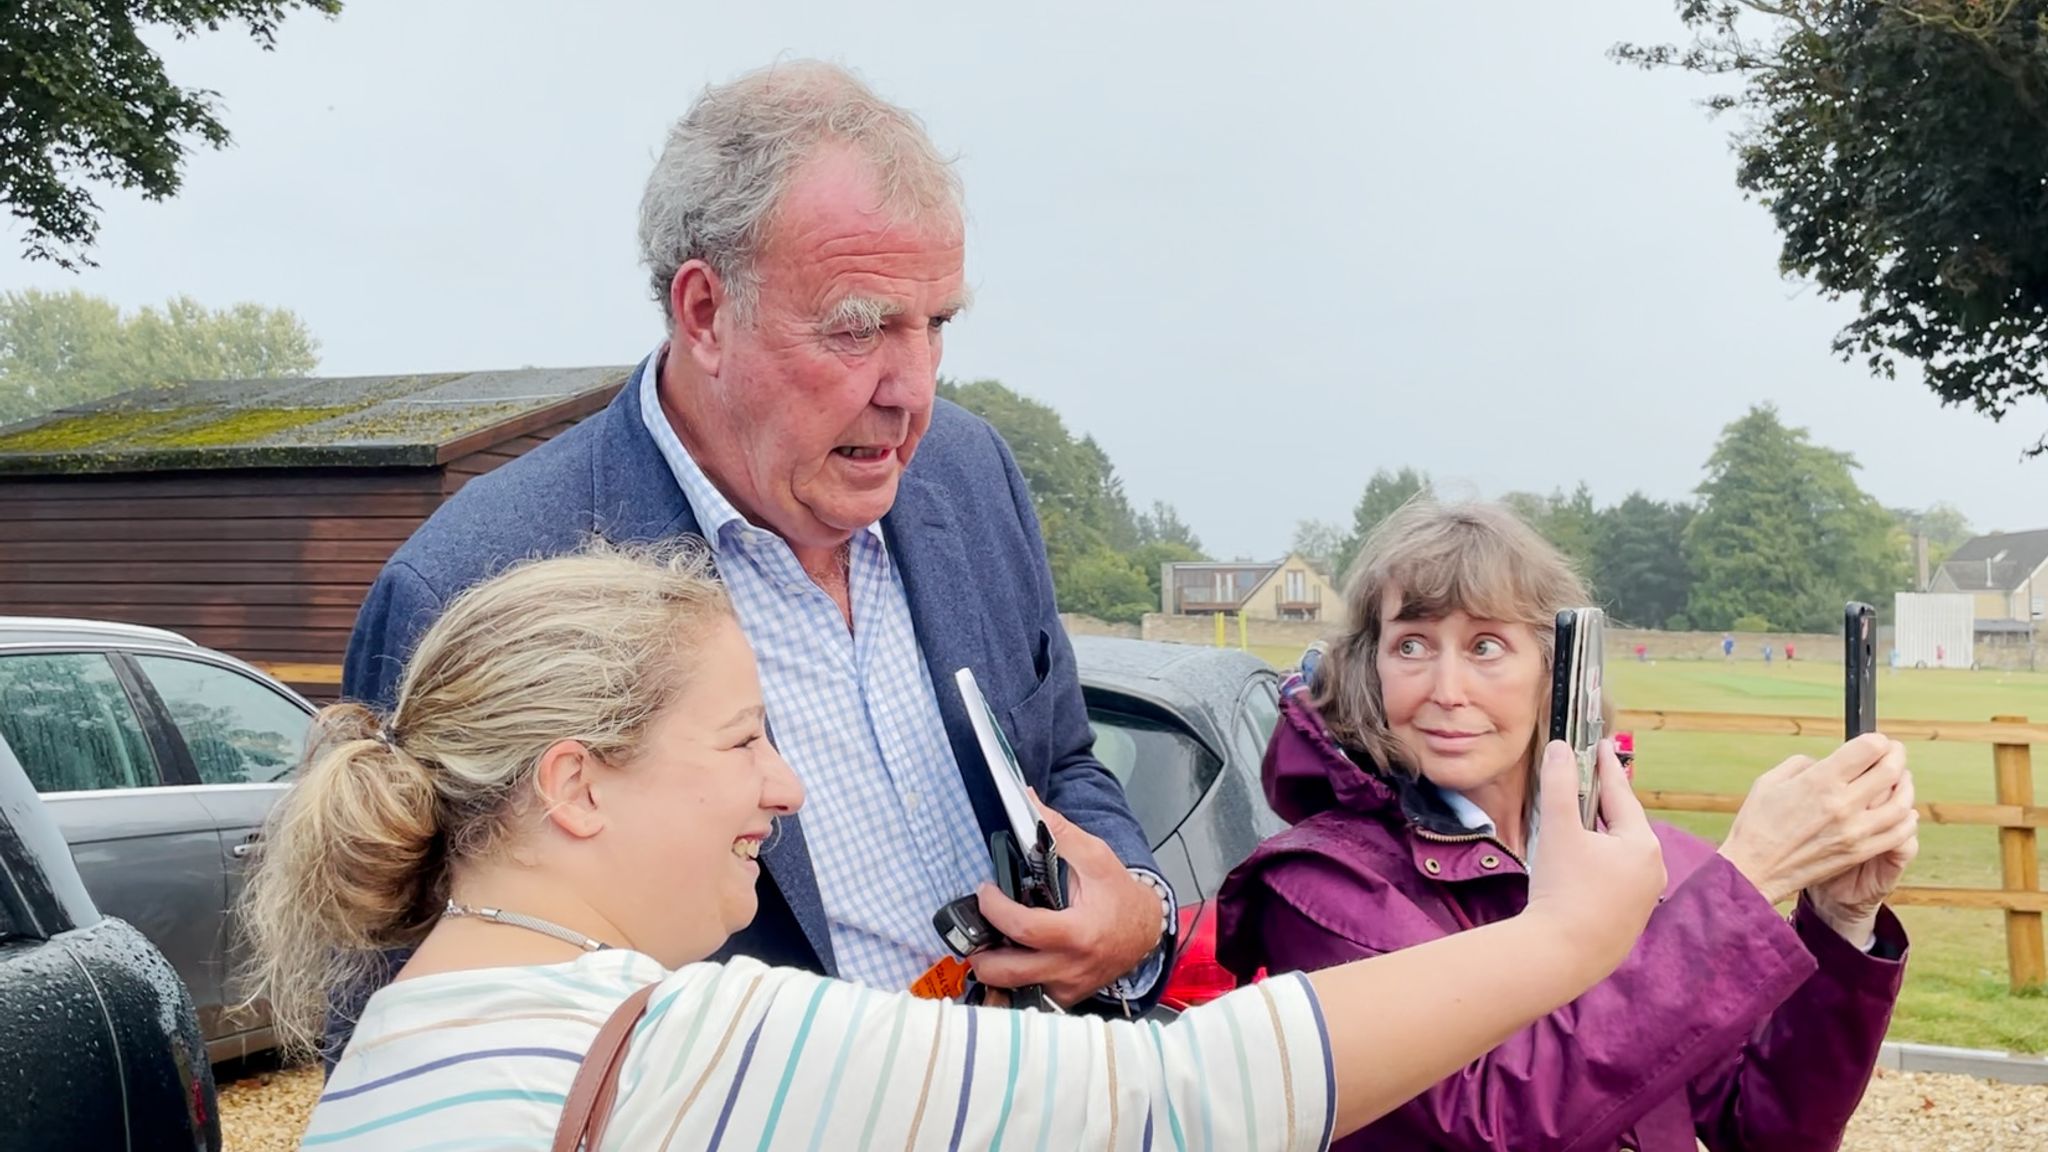 Jeremy Clarkson with fans at the Memorial Hall in Chadlington